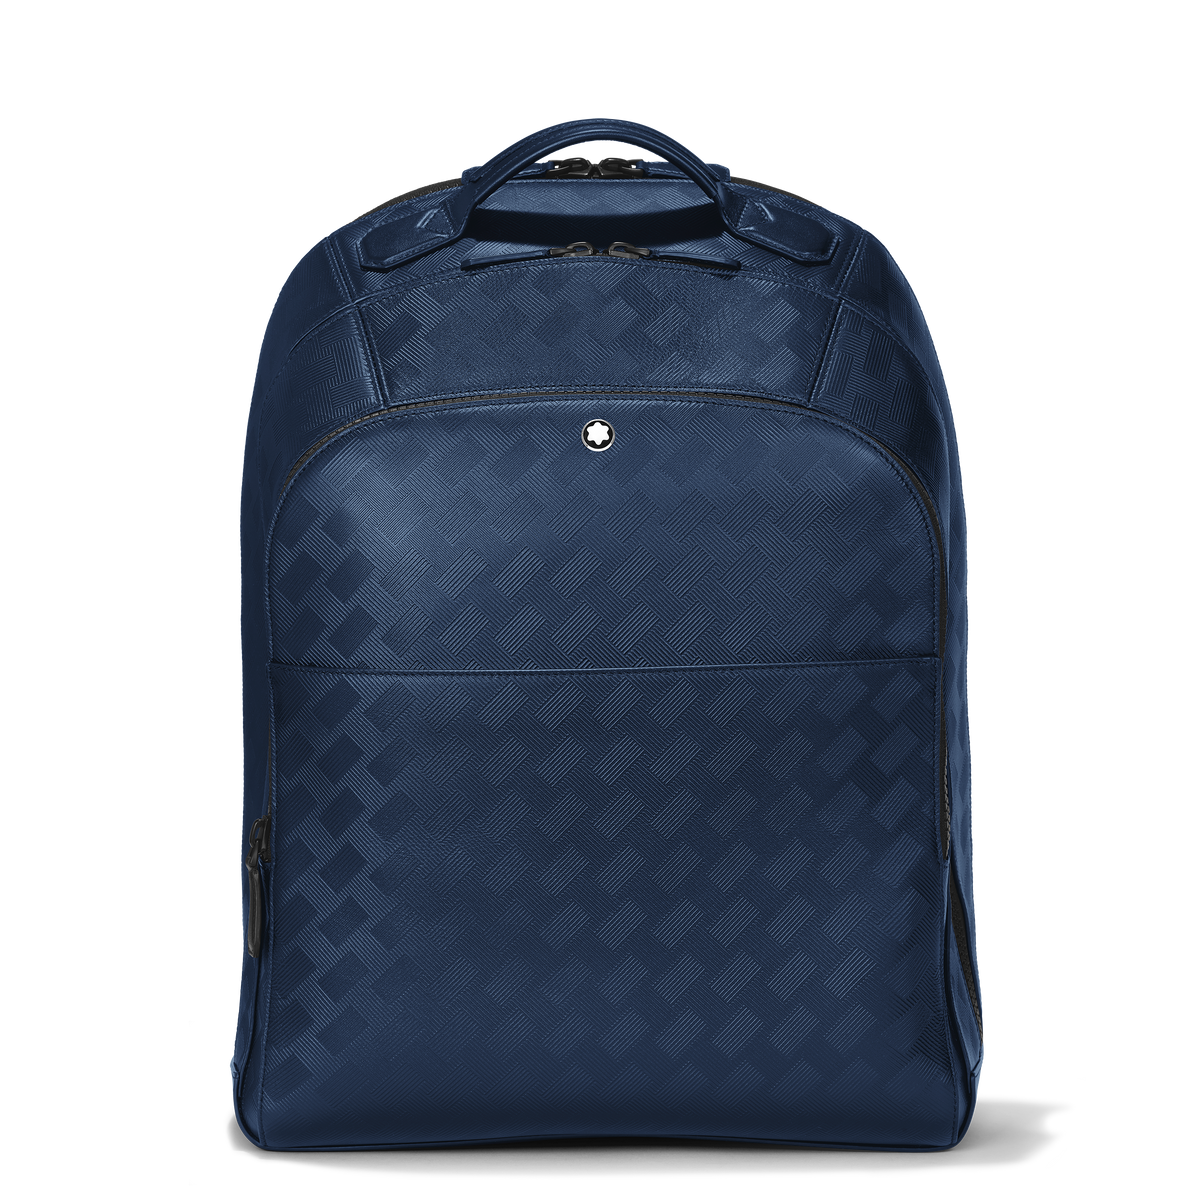 Extreme 3.0 large backpack 3 compartments